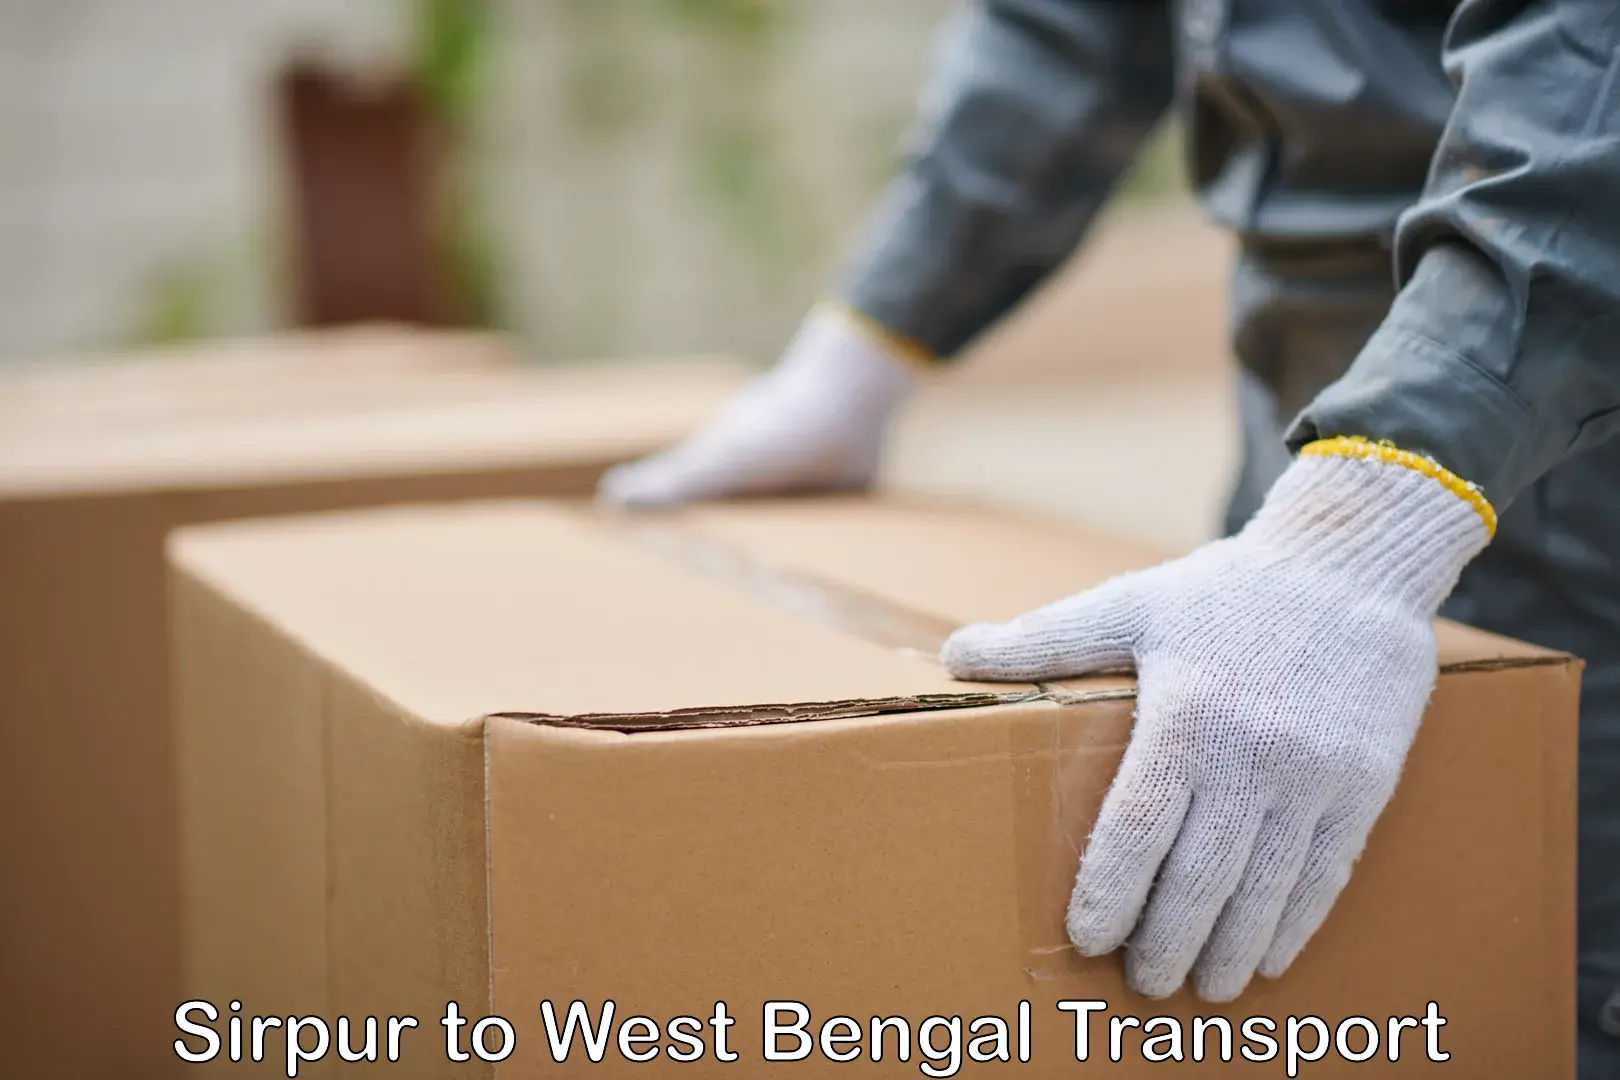 Commercial transport service Sirpur to West Bengal